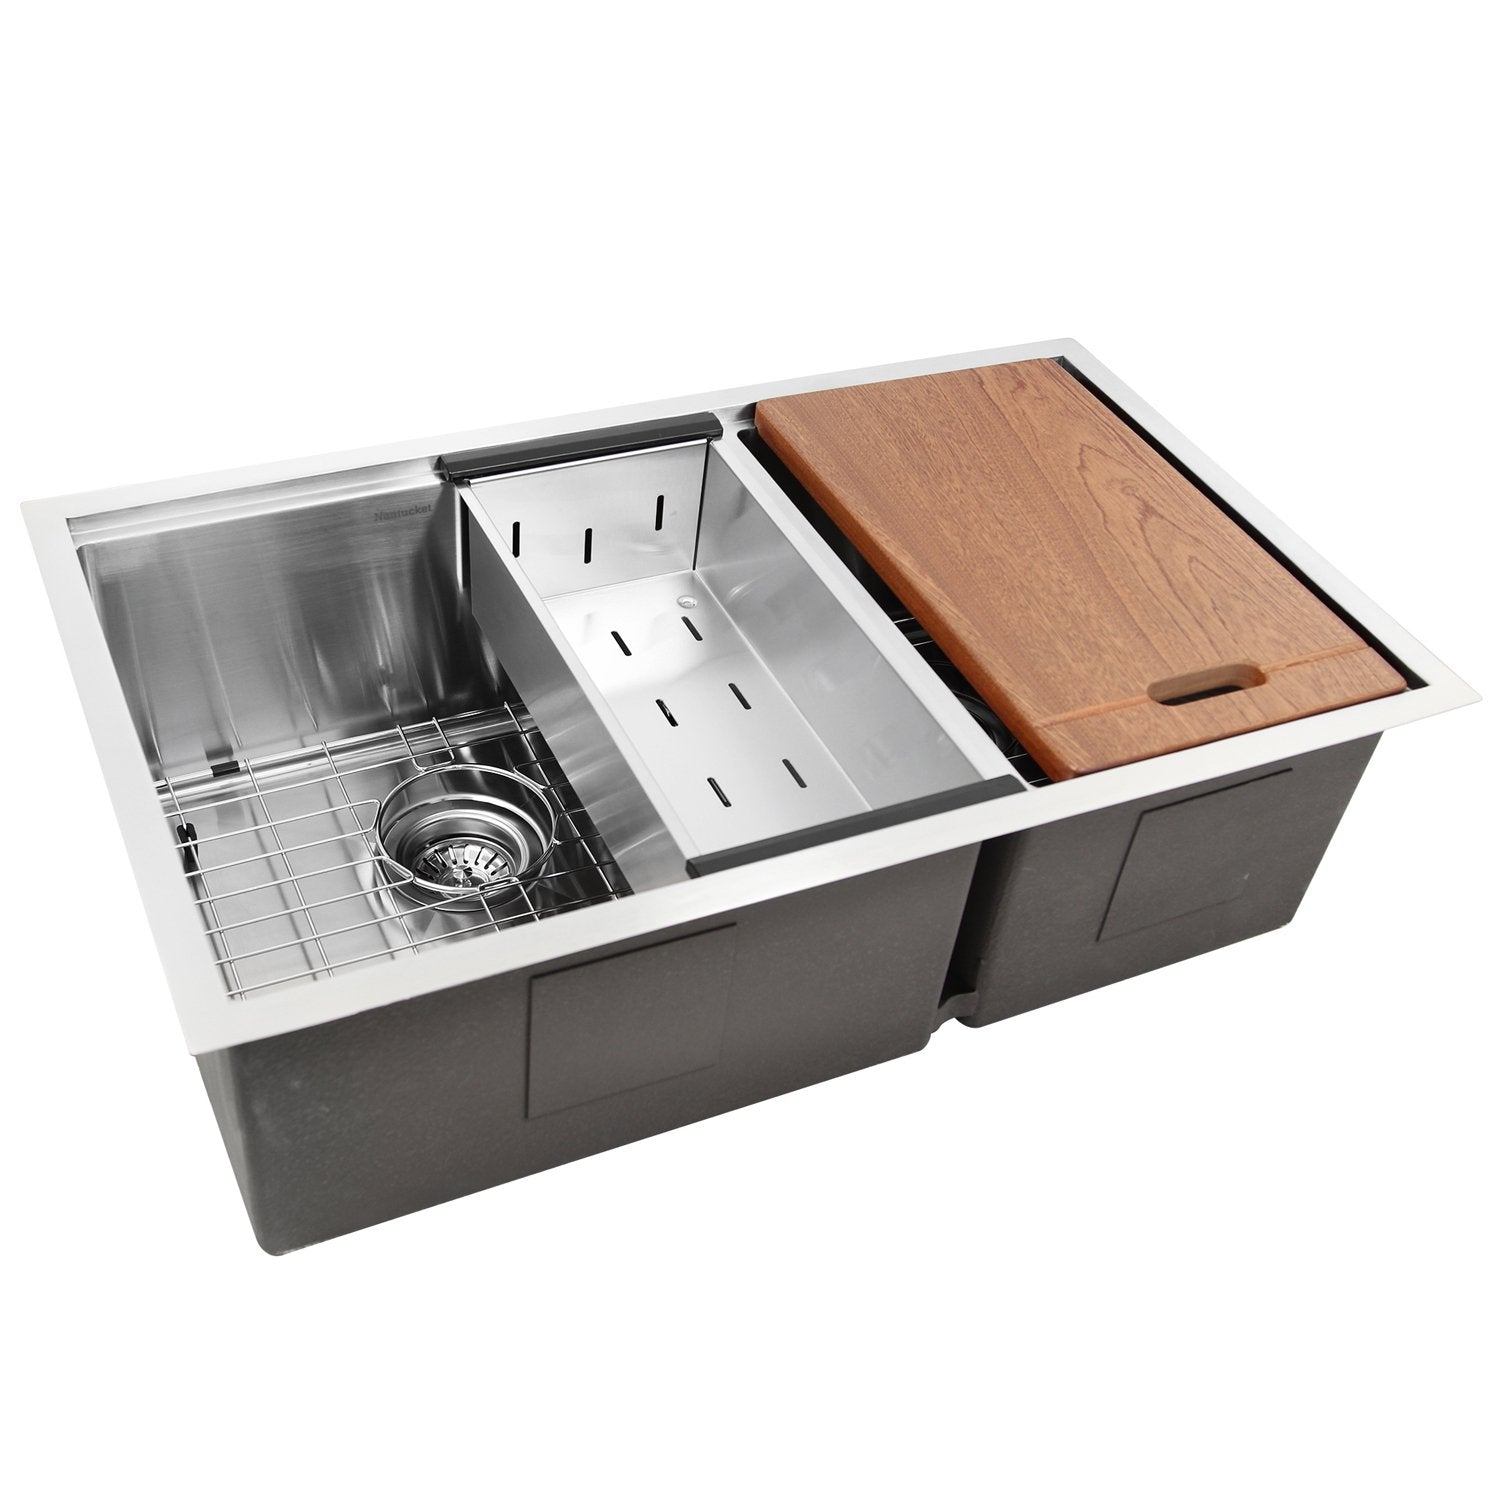 Nantucket Sinks SR-PS-3219-OS-16 Offset Double Bowl Workstation Small Radius Undermount Stainless Sink with Accessories